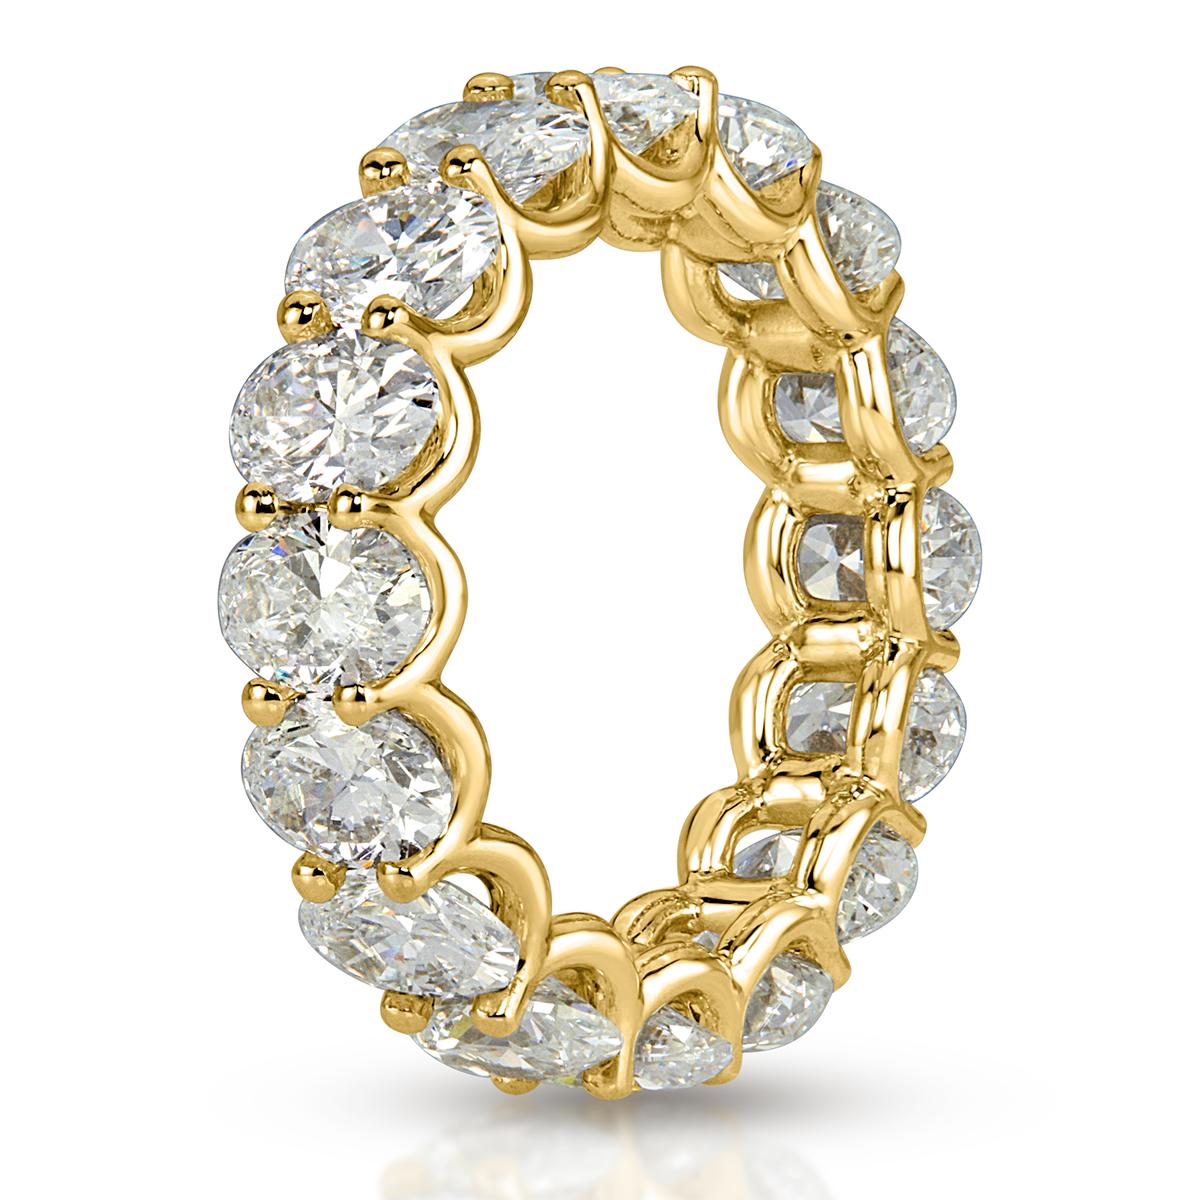 This strikingly beautiful diamond eternity band showcases 6.52ct of perfectly matched oval cut diamonds graded at E-F in color, VS1-VS2 in clarity. The diamonds are each hand selected and set in a sturdy, 18k yellow gold 